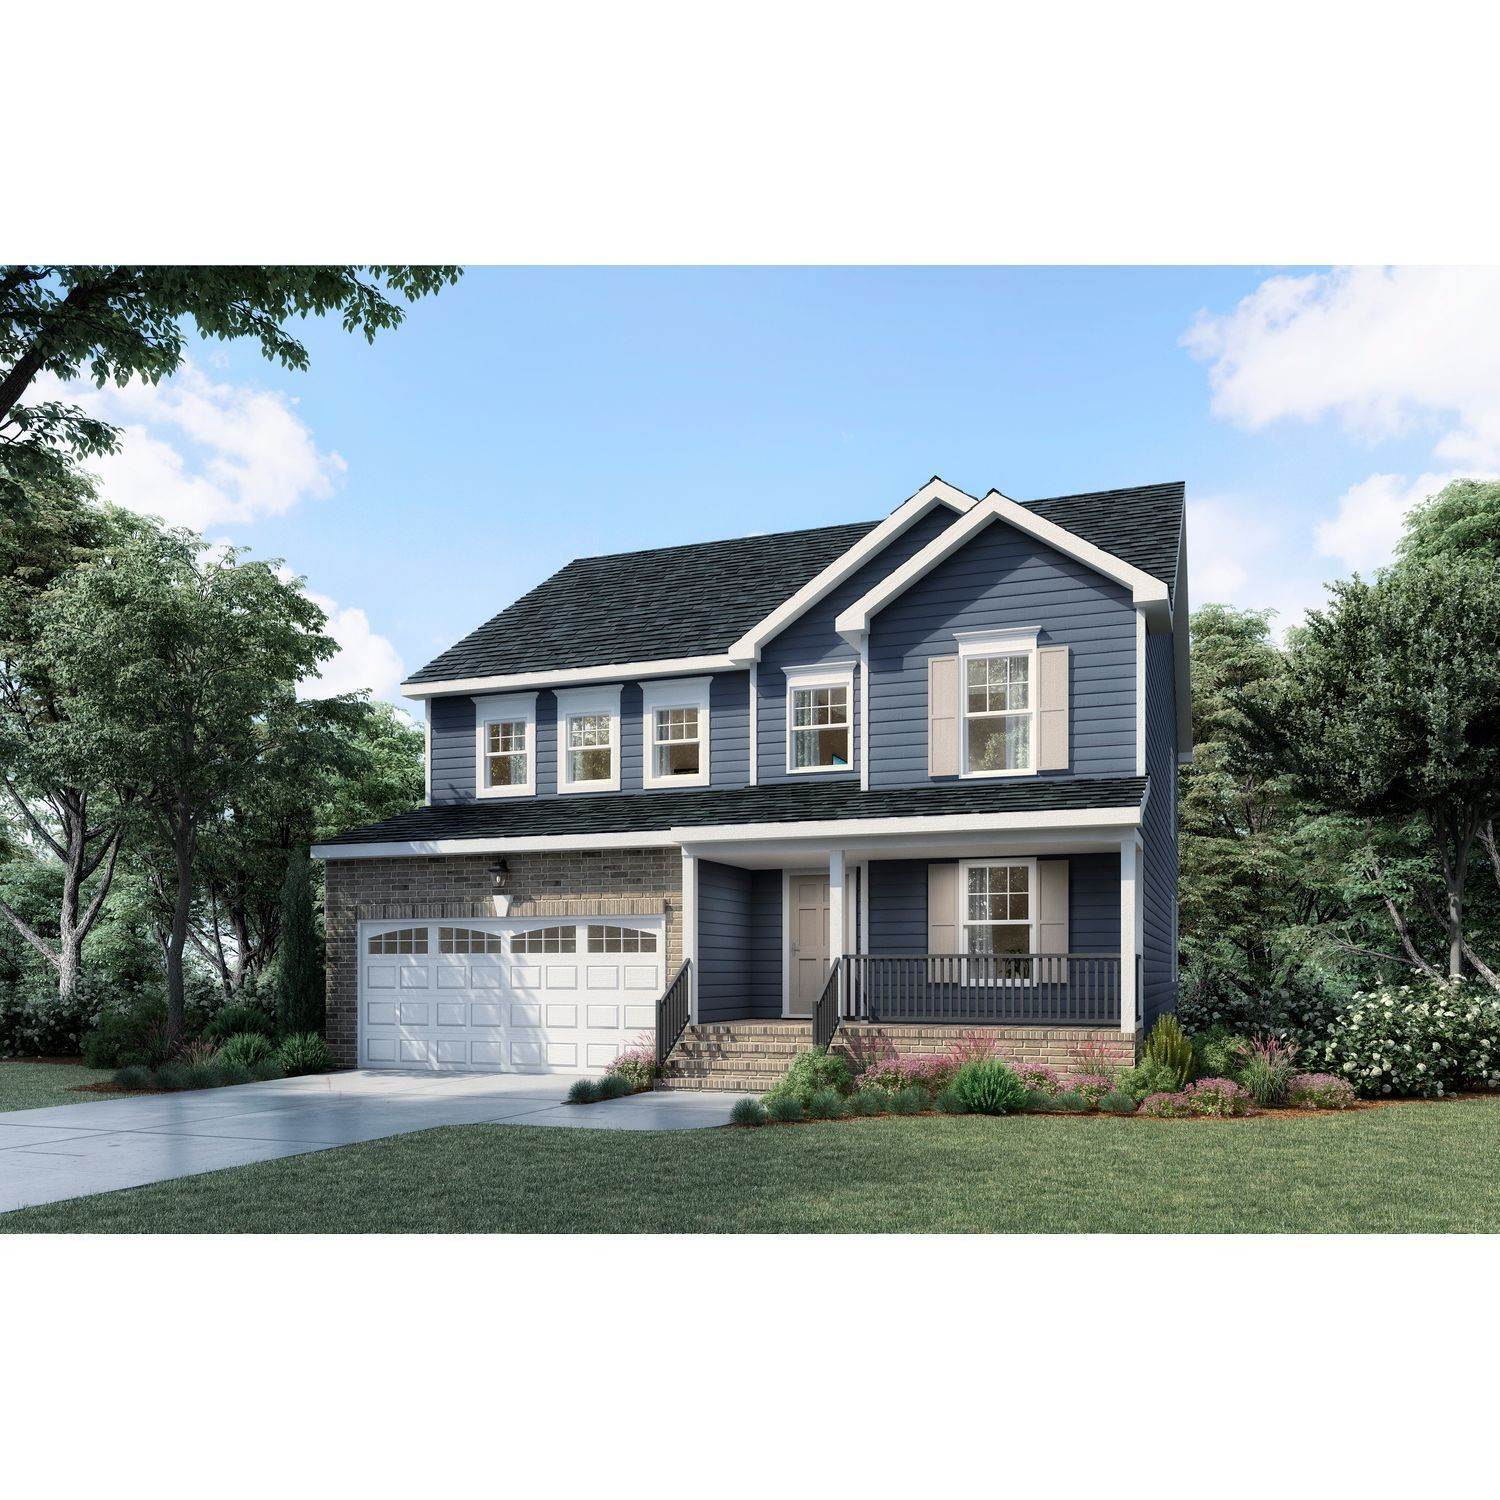 22. Single Family for Sale at Chester, VA 23831